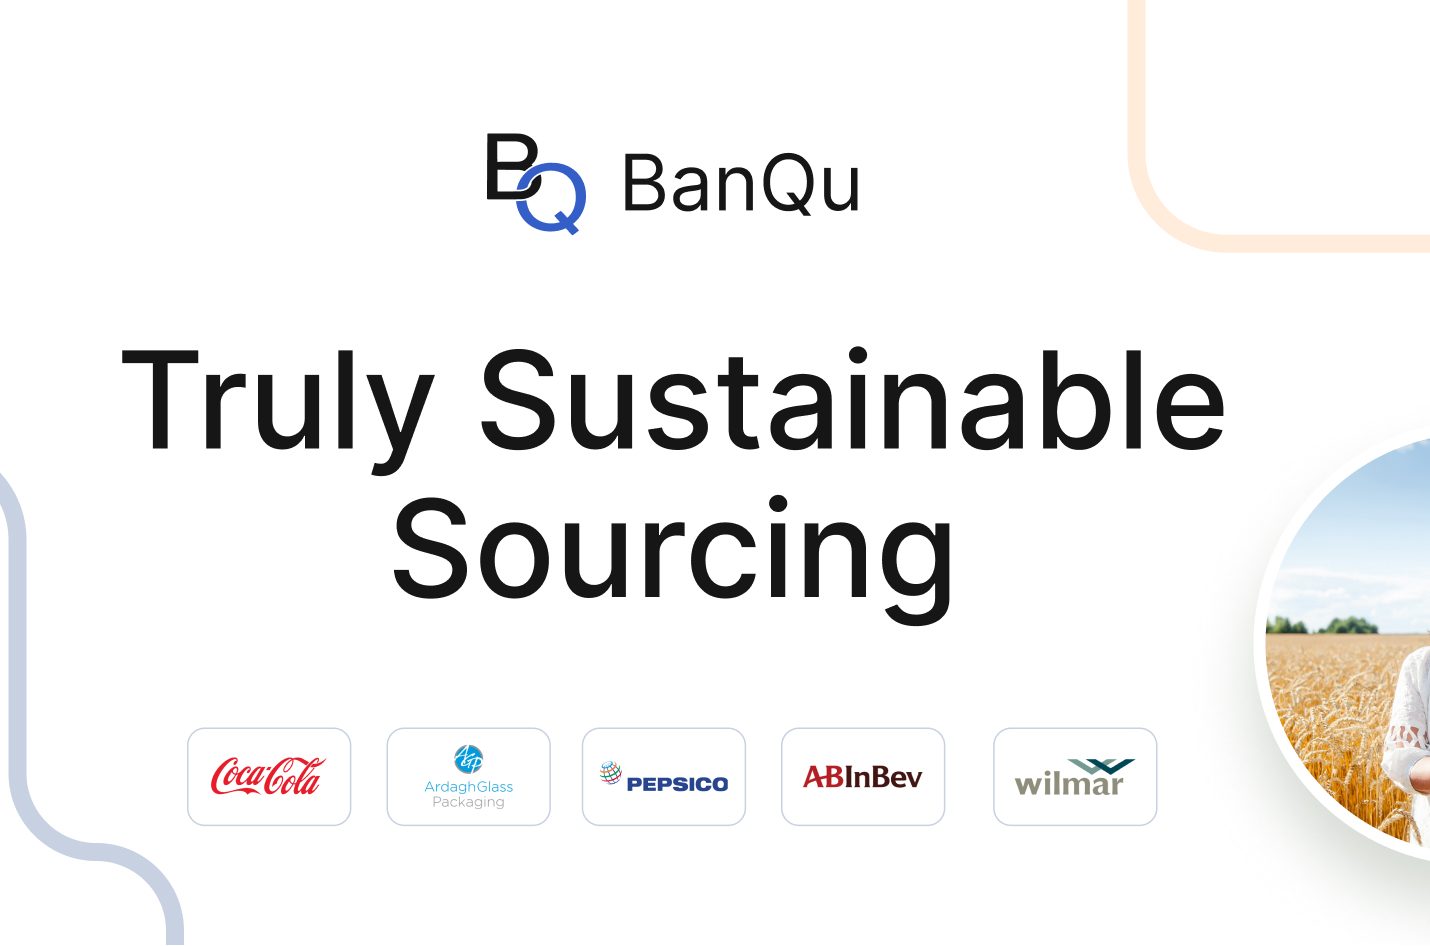 S.Africa’s BanQu app represents model for African recycling efforts  